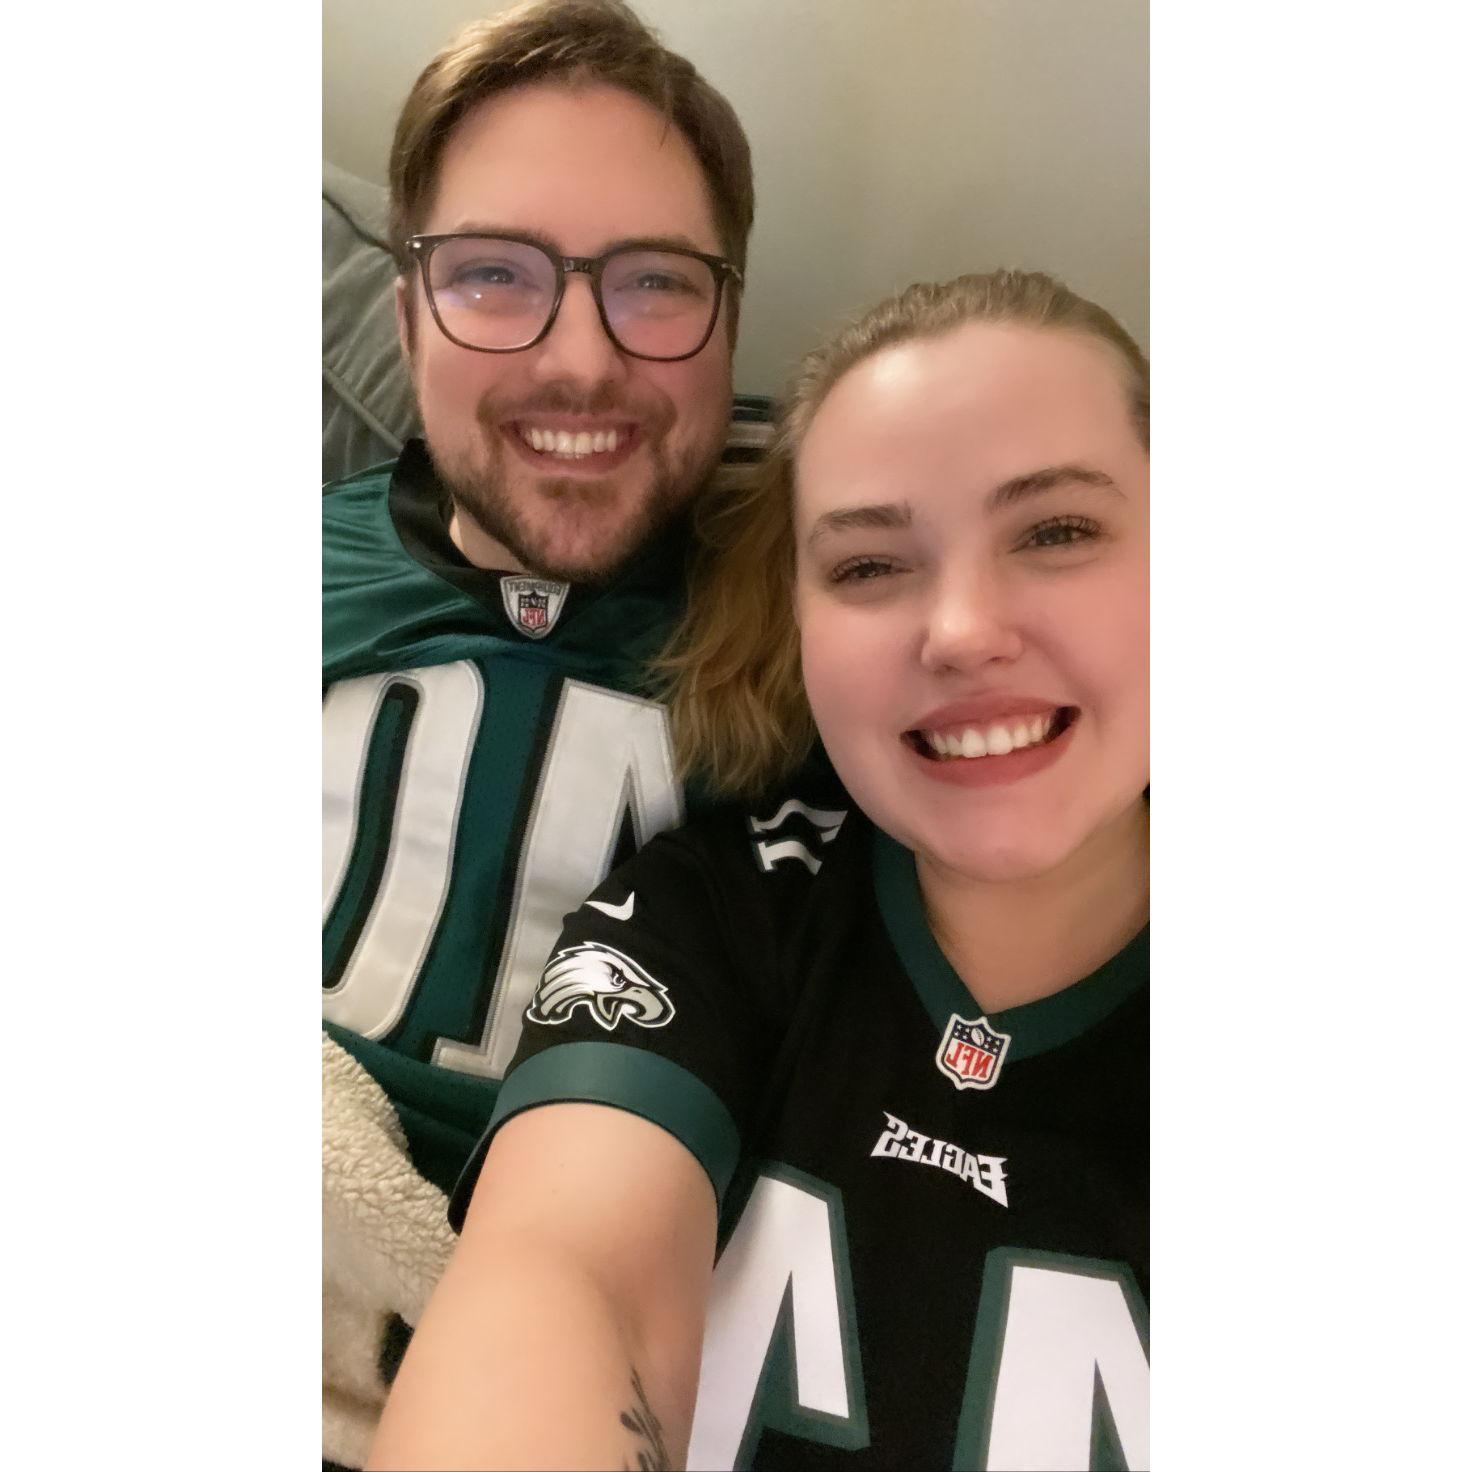 I guess I'm an Eagles fan now